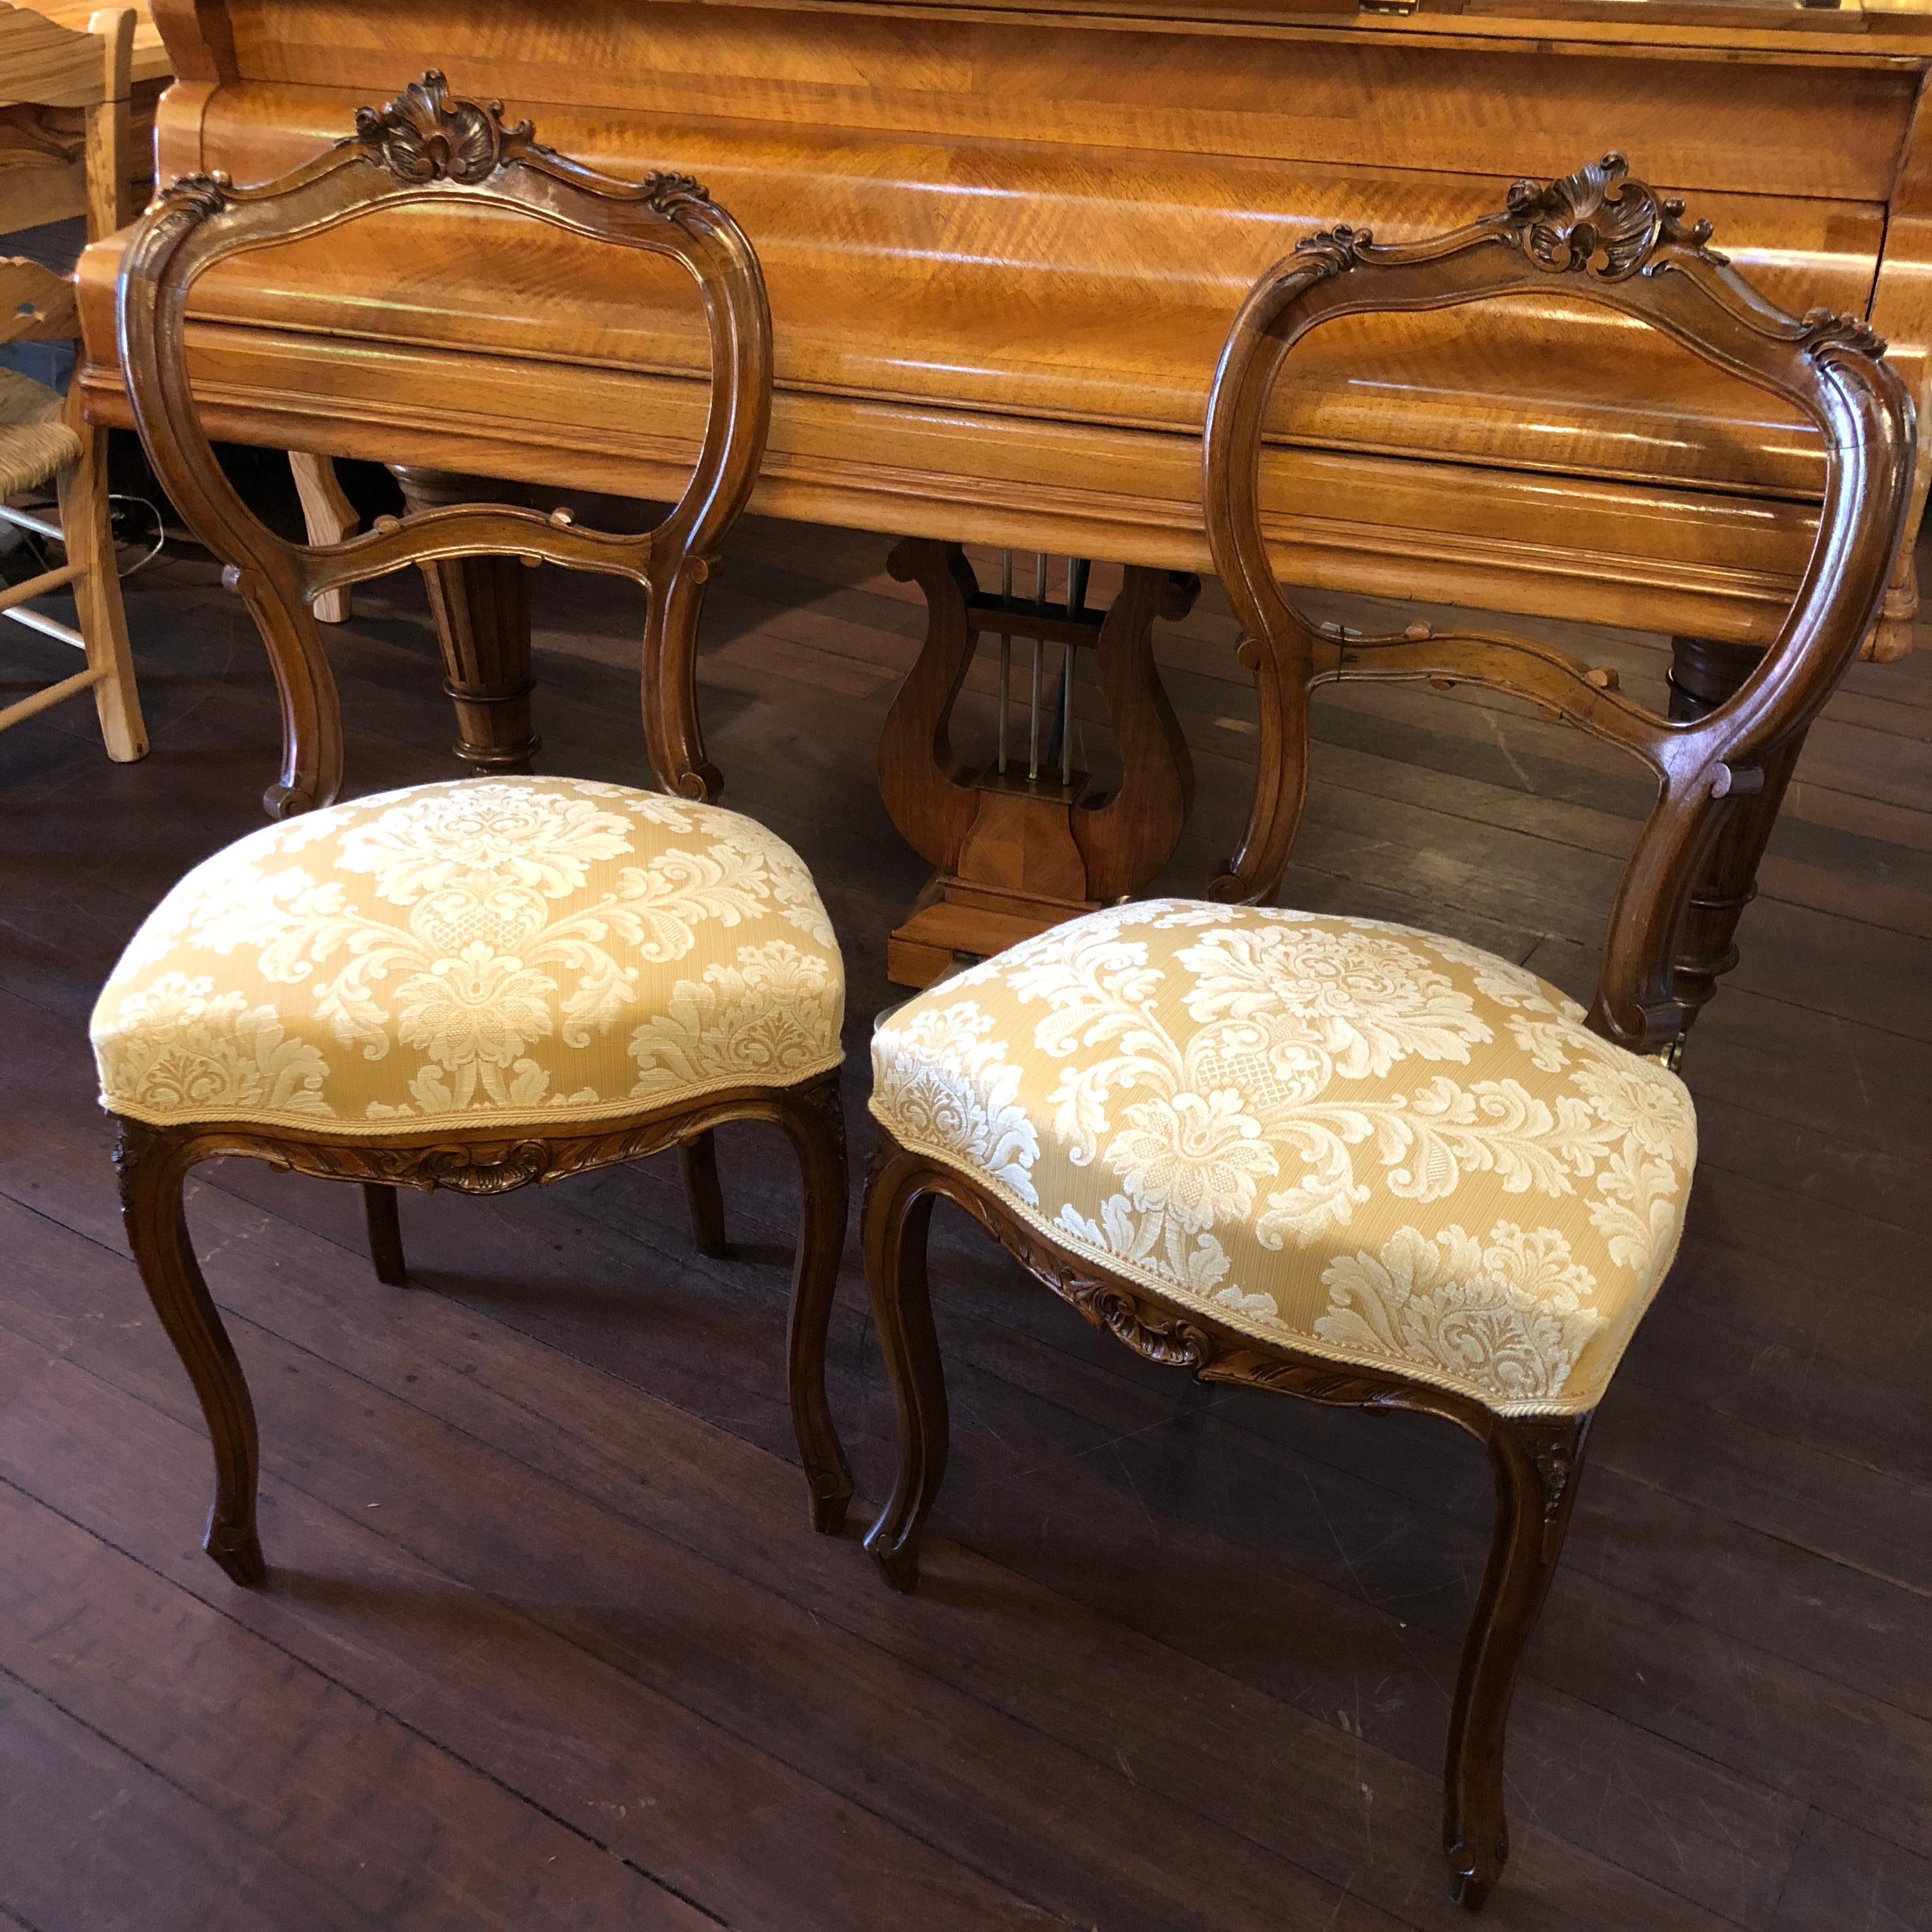 This beautiful pair of 19th century. Italian Walnut chairs feature crème yellow patterned upholstery and walnut frames. They were originally found by us in the Veneto region of Italy and would perfectly compliment a ladies office desk or could be